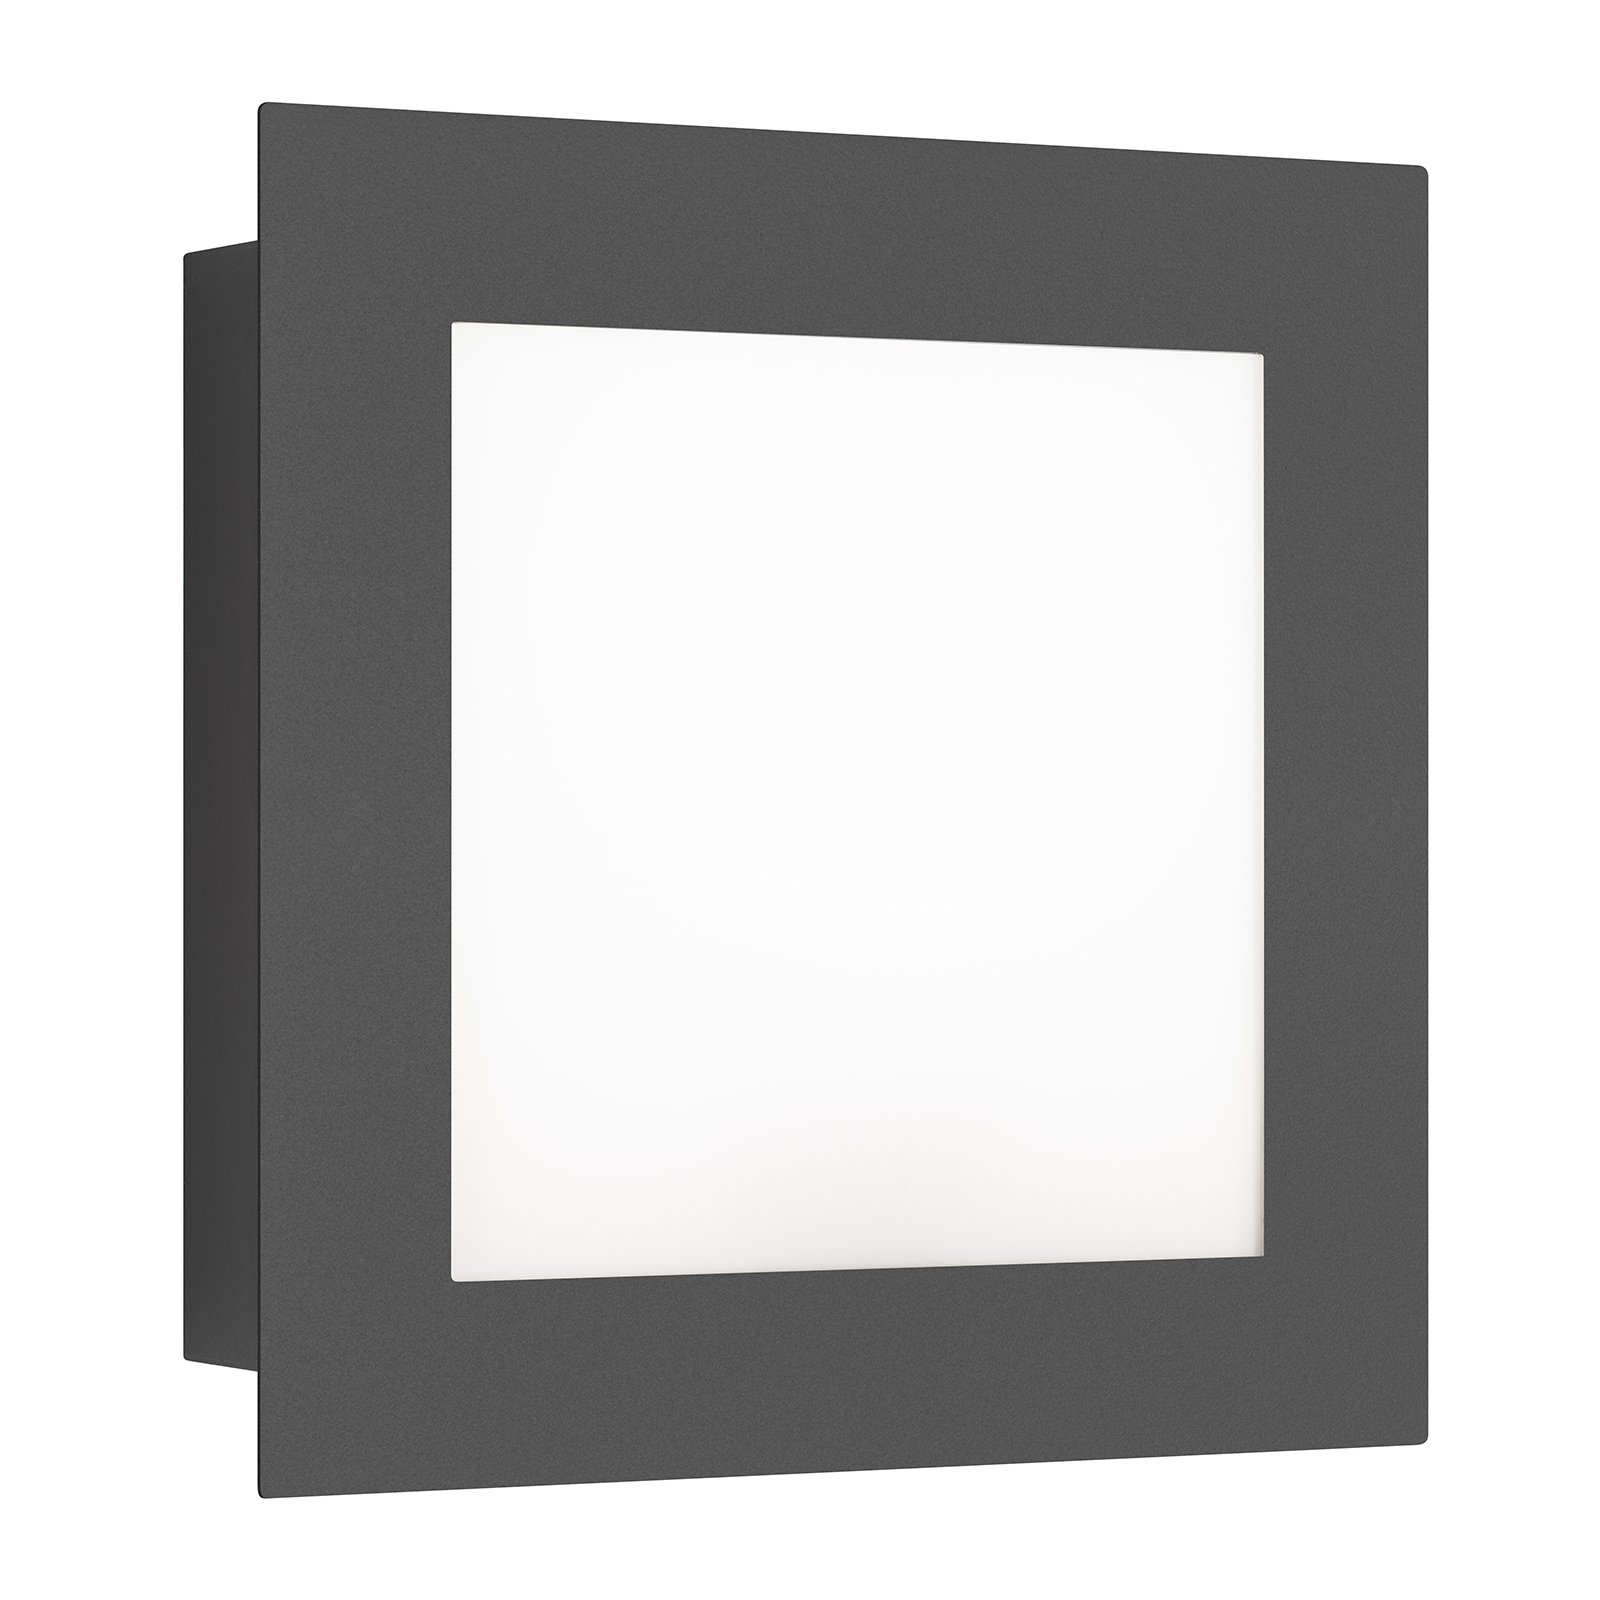 3007LED LED outdoor wall light, graphite